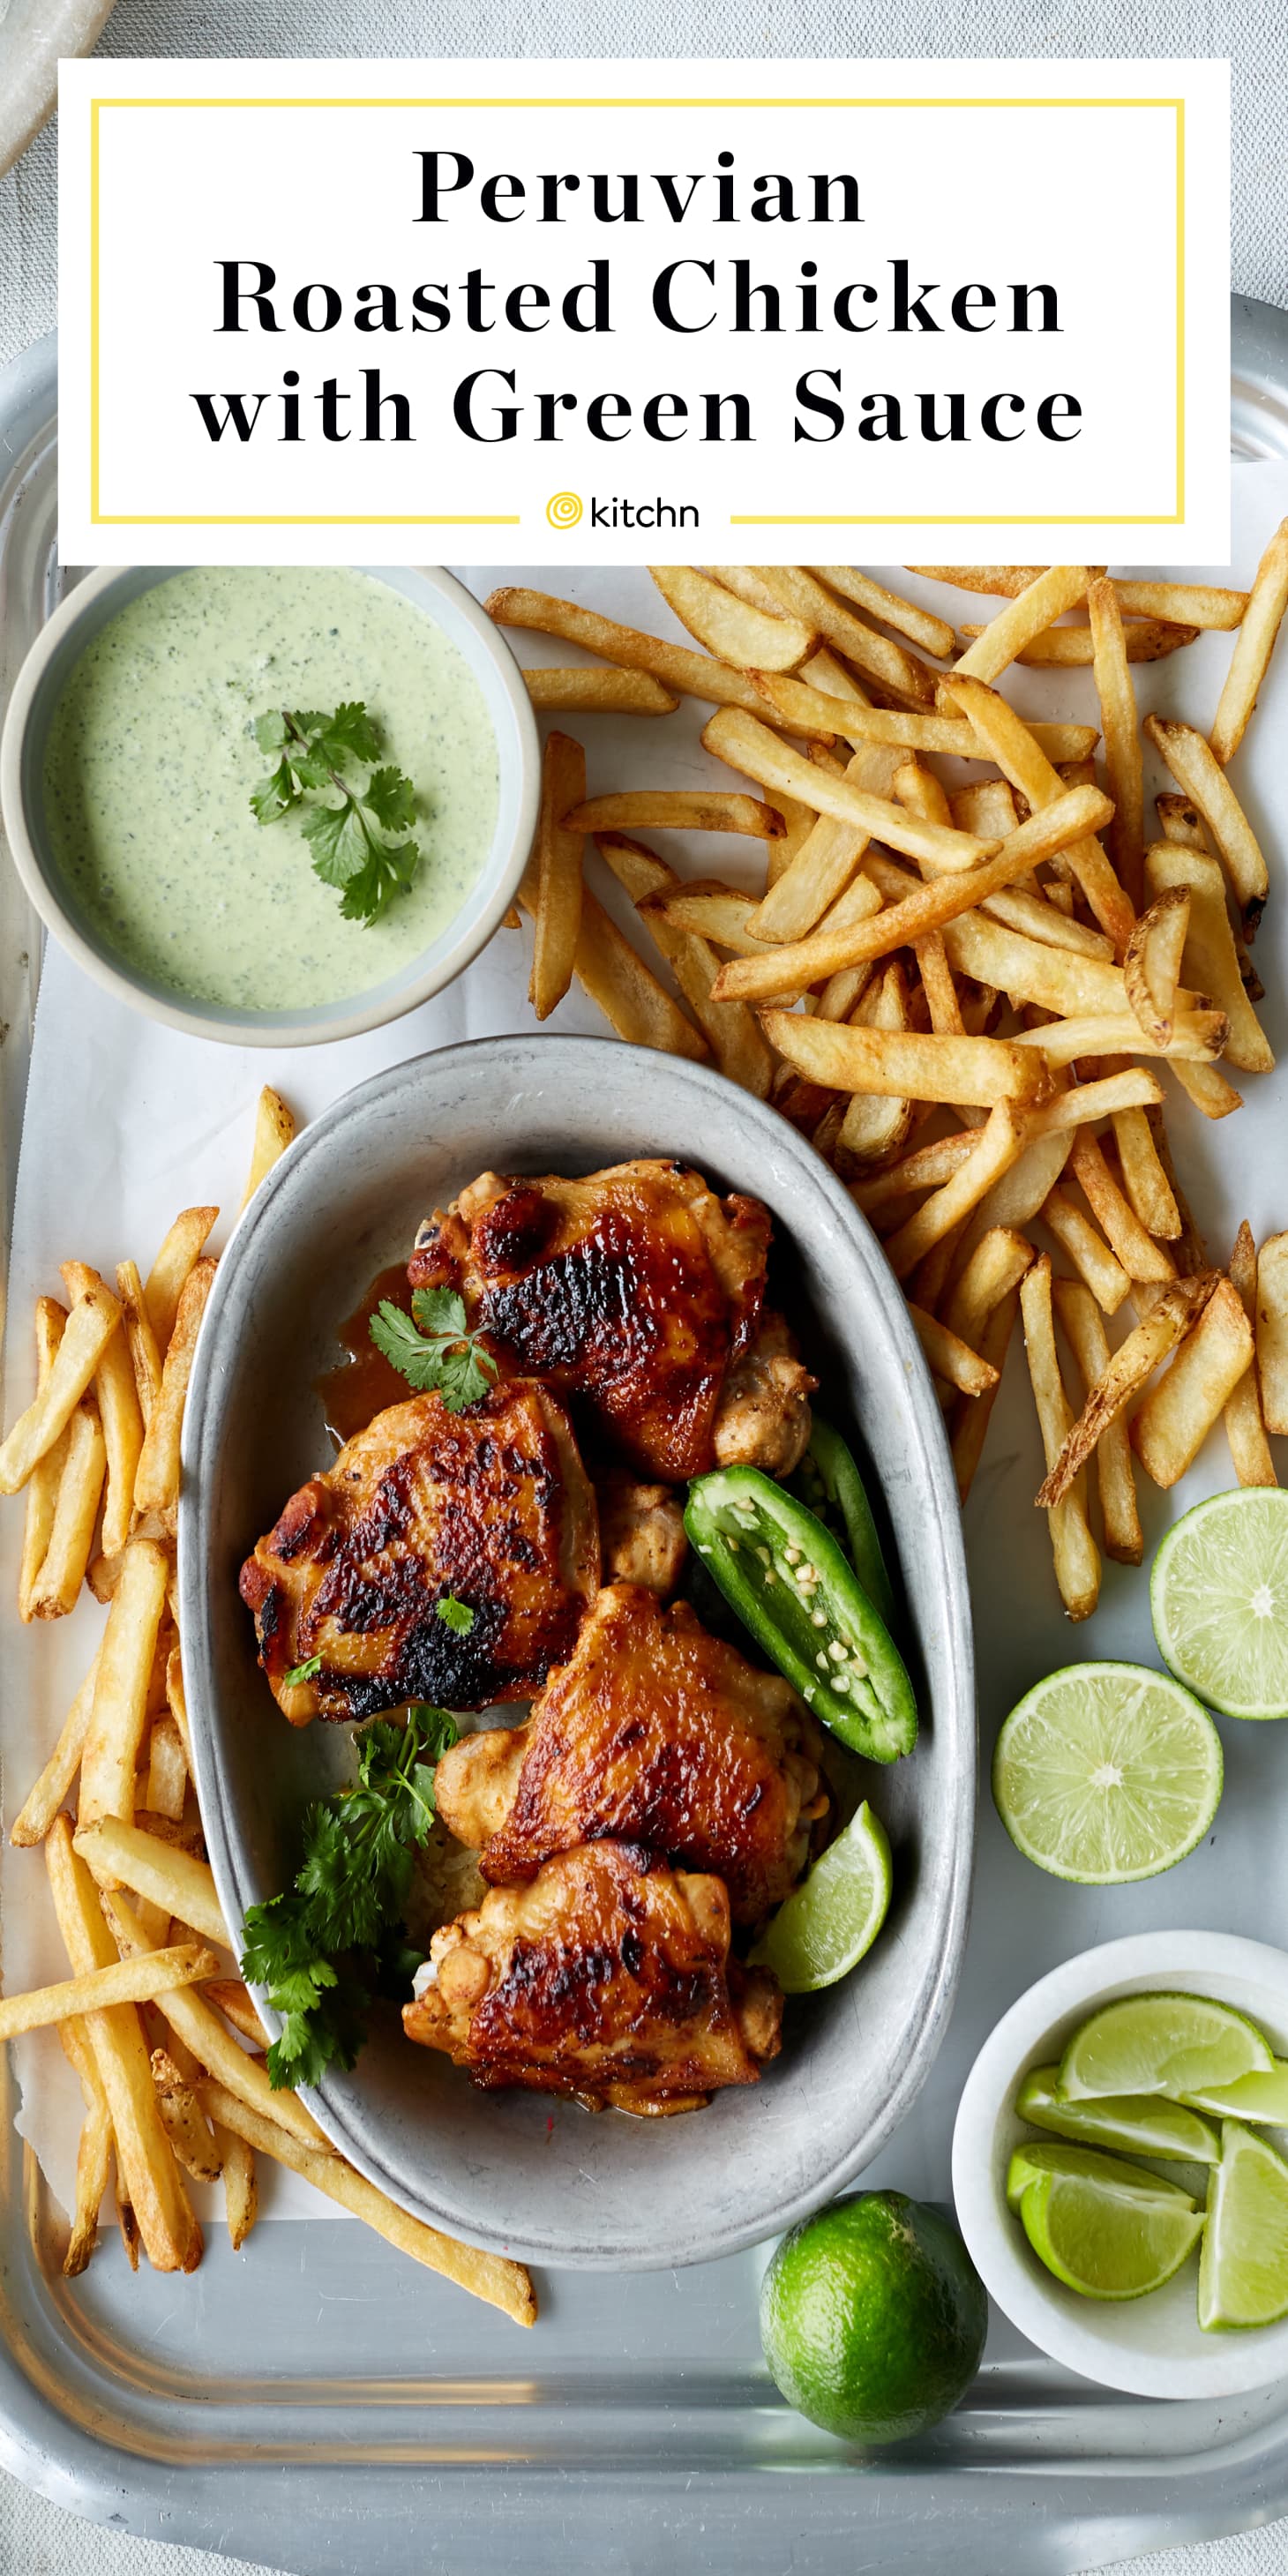 Peruvian Roasted Chicken with Green Sauce | Kitchn